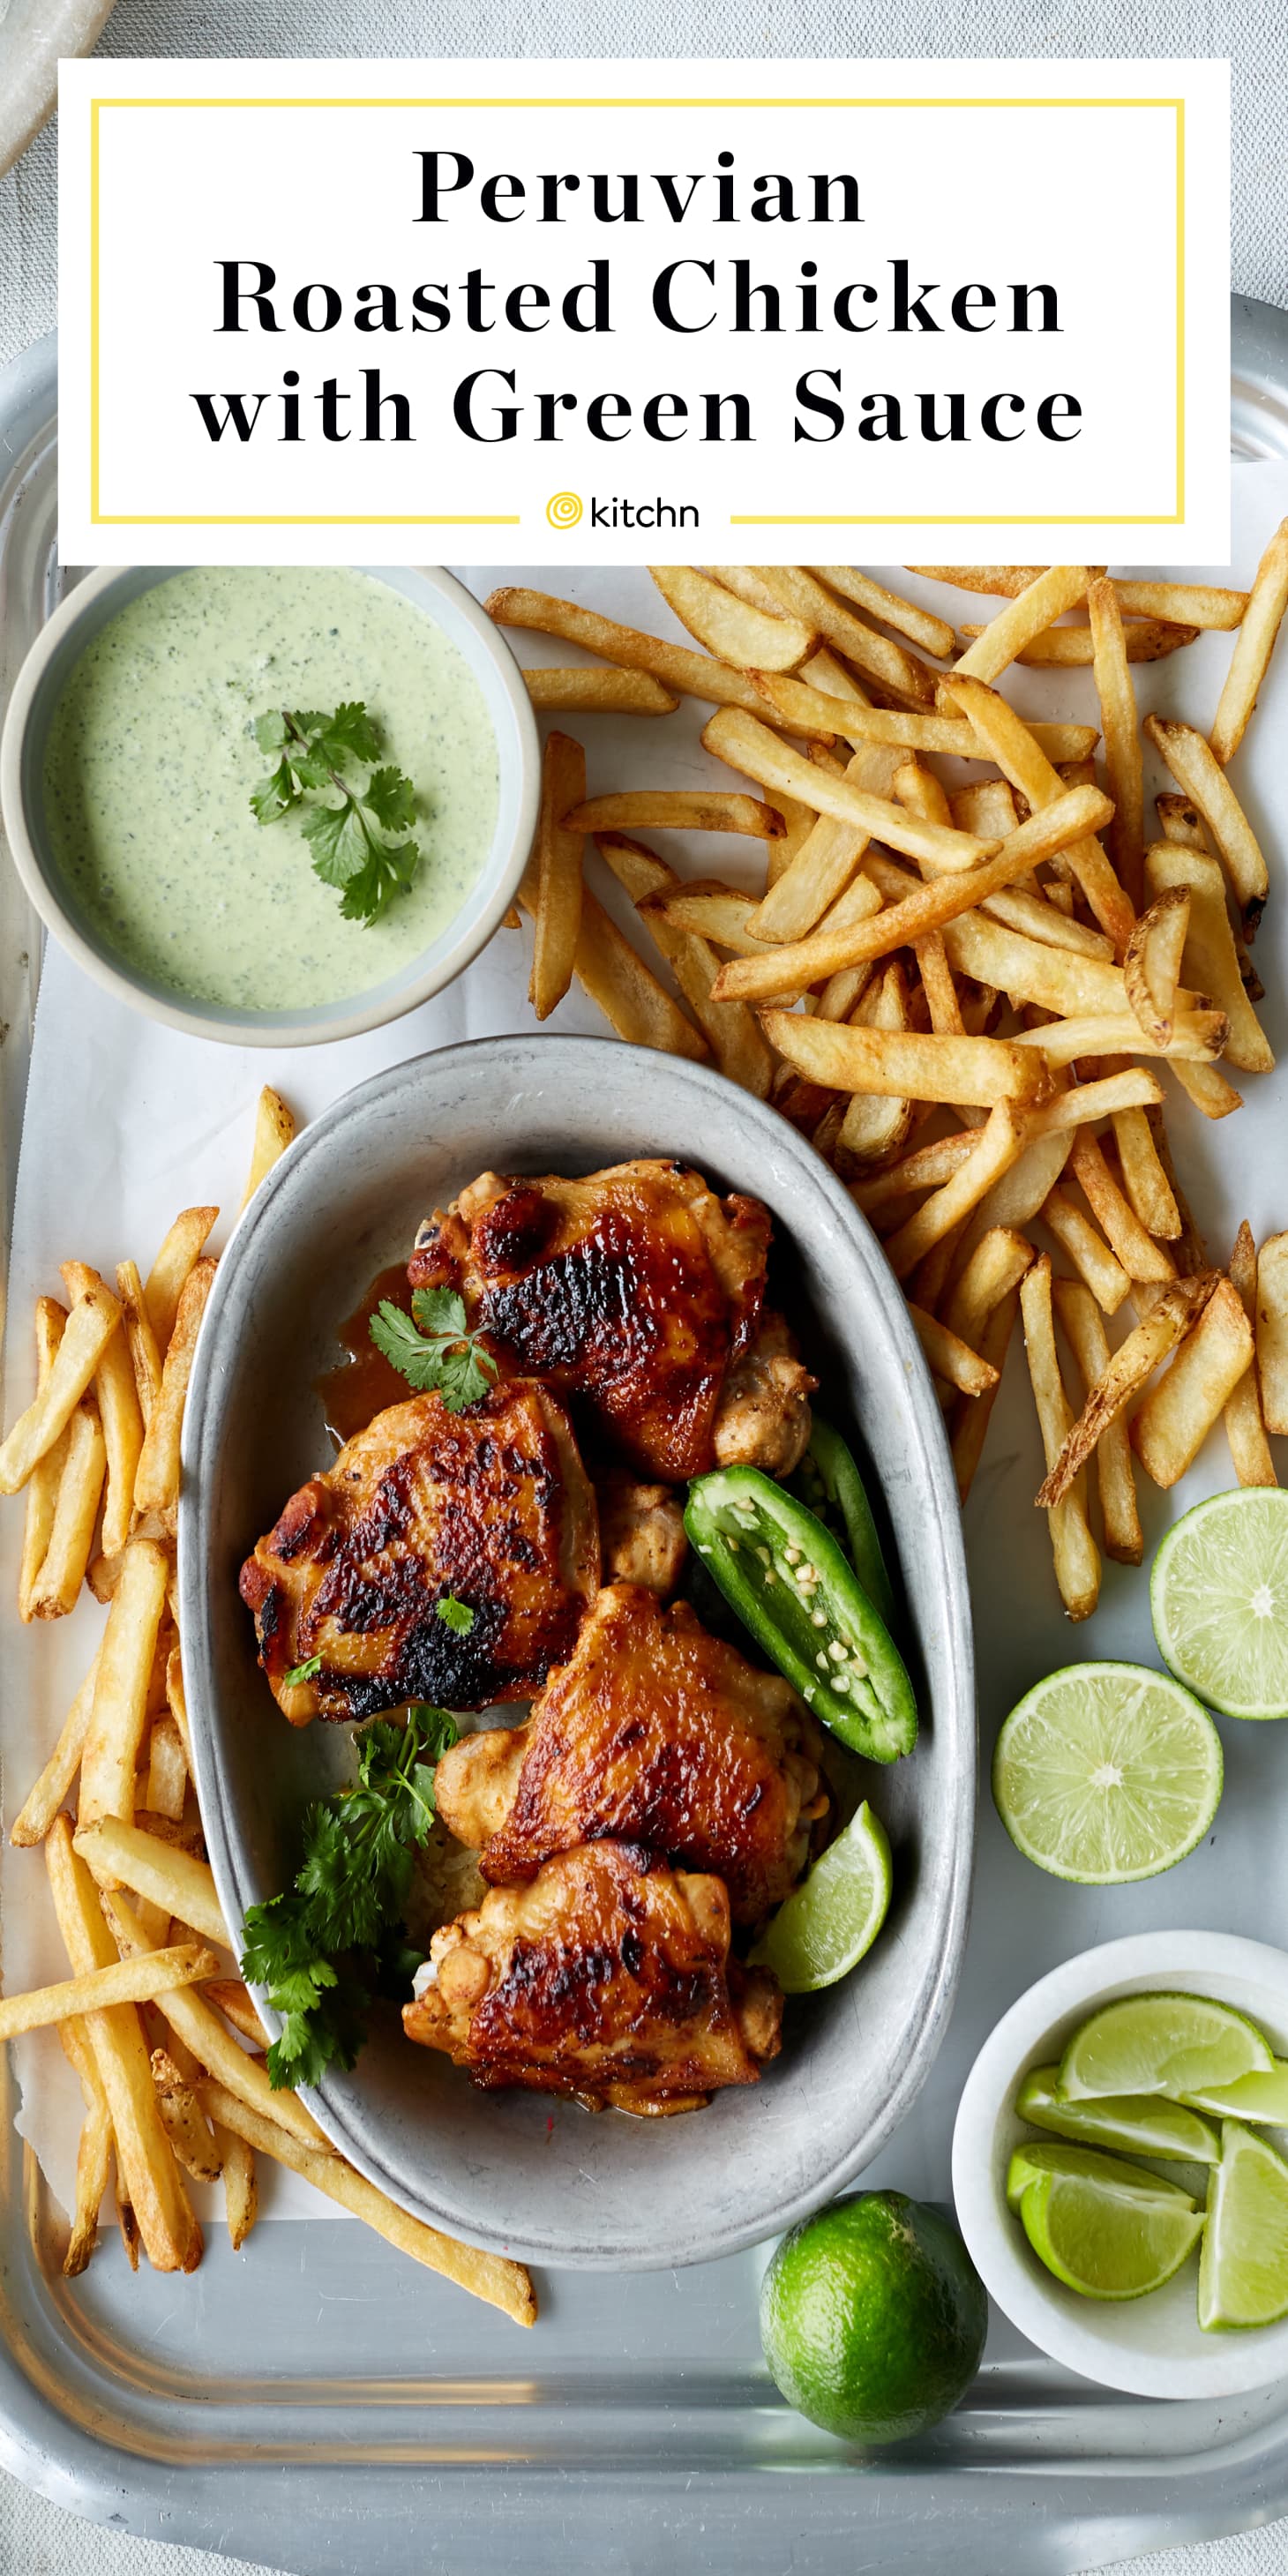 Peruvian Roasted Chicken with Green Sauce | Kitchn